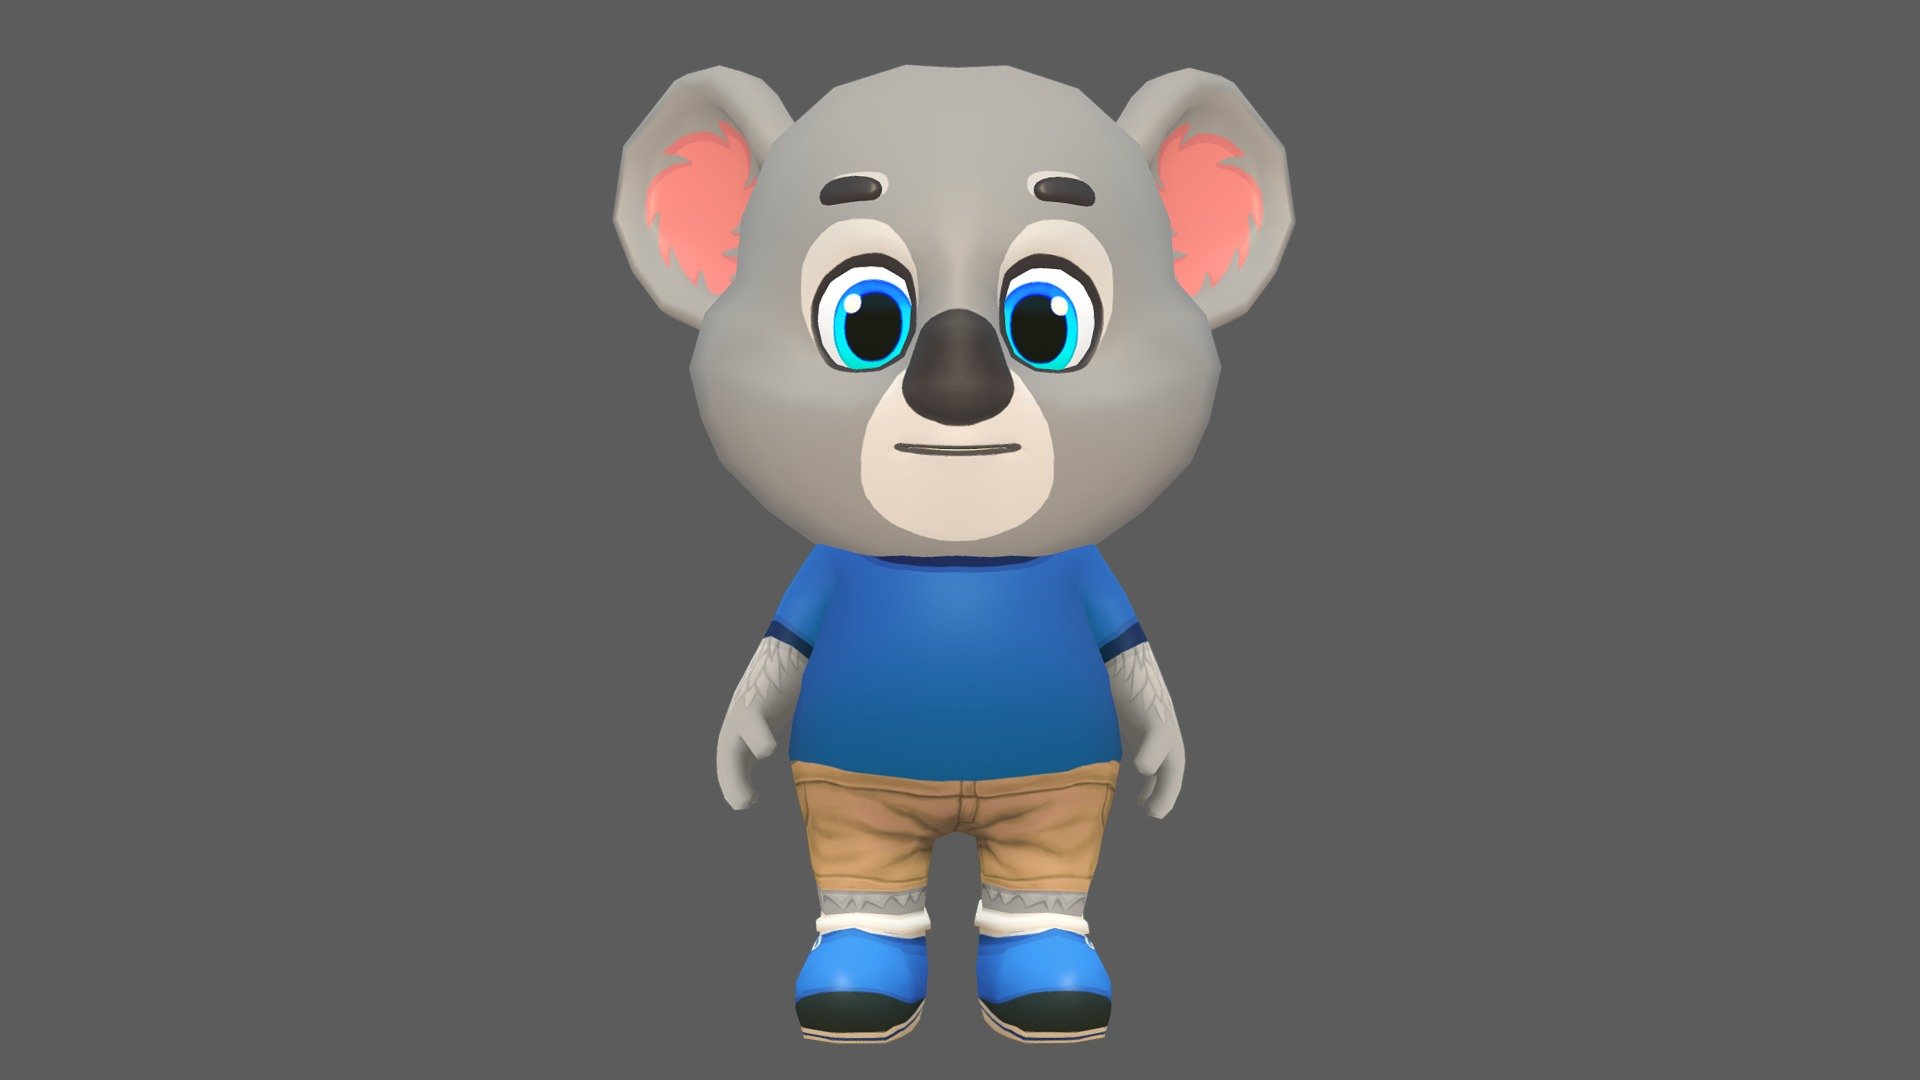 Koala Bear character for games and animations. The model is game ready and compatible with game engines.

Included Files:




Maya (.ma, .mb) - 2015 - 2020

FBX - 2014 - 2020

OBJ

Supports Humanoid Animation:




Unity Humanoid compatible.

Mixamo and other humanoid animation libraries (MoCap).

Removable Tail.

Full Facial and Body Rig for further animation.

The model is lowpoly with four texture resolutions 4096x4096, 2048x2048, 1024x1024 &amp; 512x512.

The package includes 18 Animations:




Run

Idle

Jump

Leap left

Leap right

Skidding

Roll

Crash &amp; Death

Power up

Whirl

Whirl jump

Waving in air

Backwards run

Dizzy

Gum Bubble

Gliding

Waving

Looking behind

The model is fully rigged and can be easily animated in case further animating or modification is required.

The model is game ready at:




3492 Polygons

3481 Vertices

The model is UV mapped with non-overlapping UV's. The shadows and lights are baked in the texture 3d model